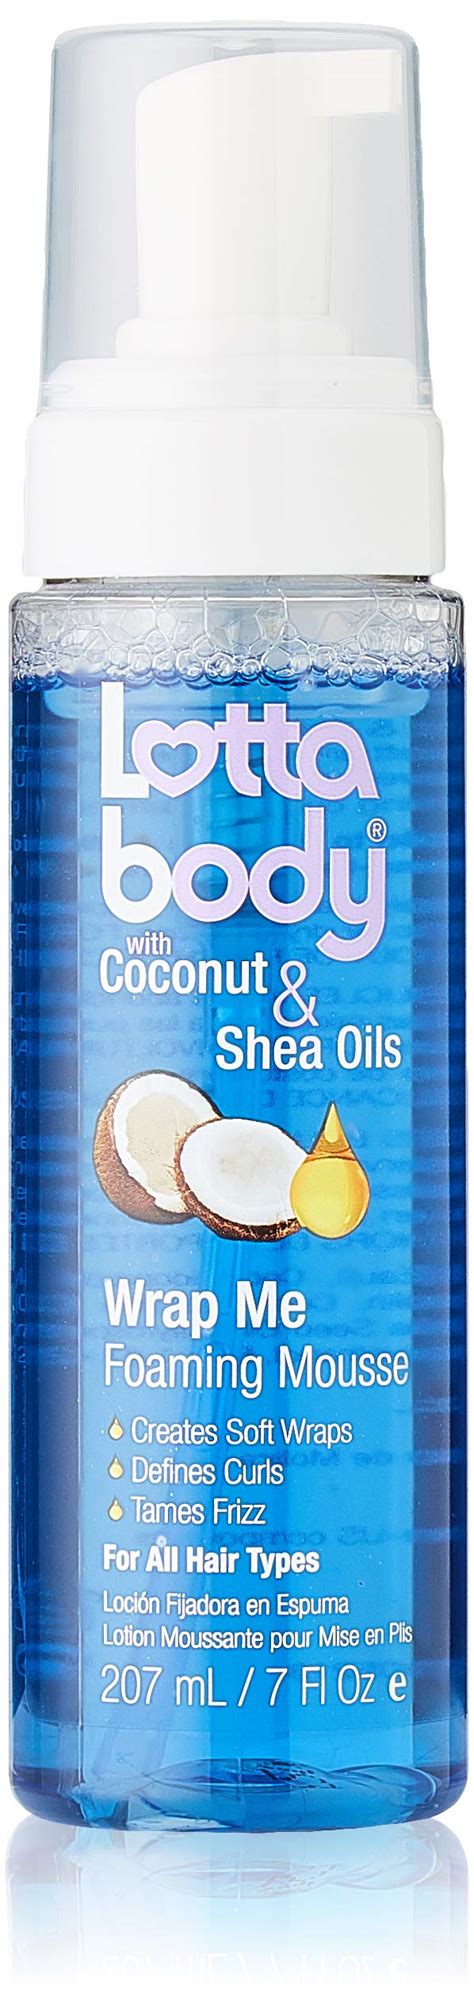 Buy Coconut Oil And Shea Wrap Me Foaming Mousse By Lotta Body Creates